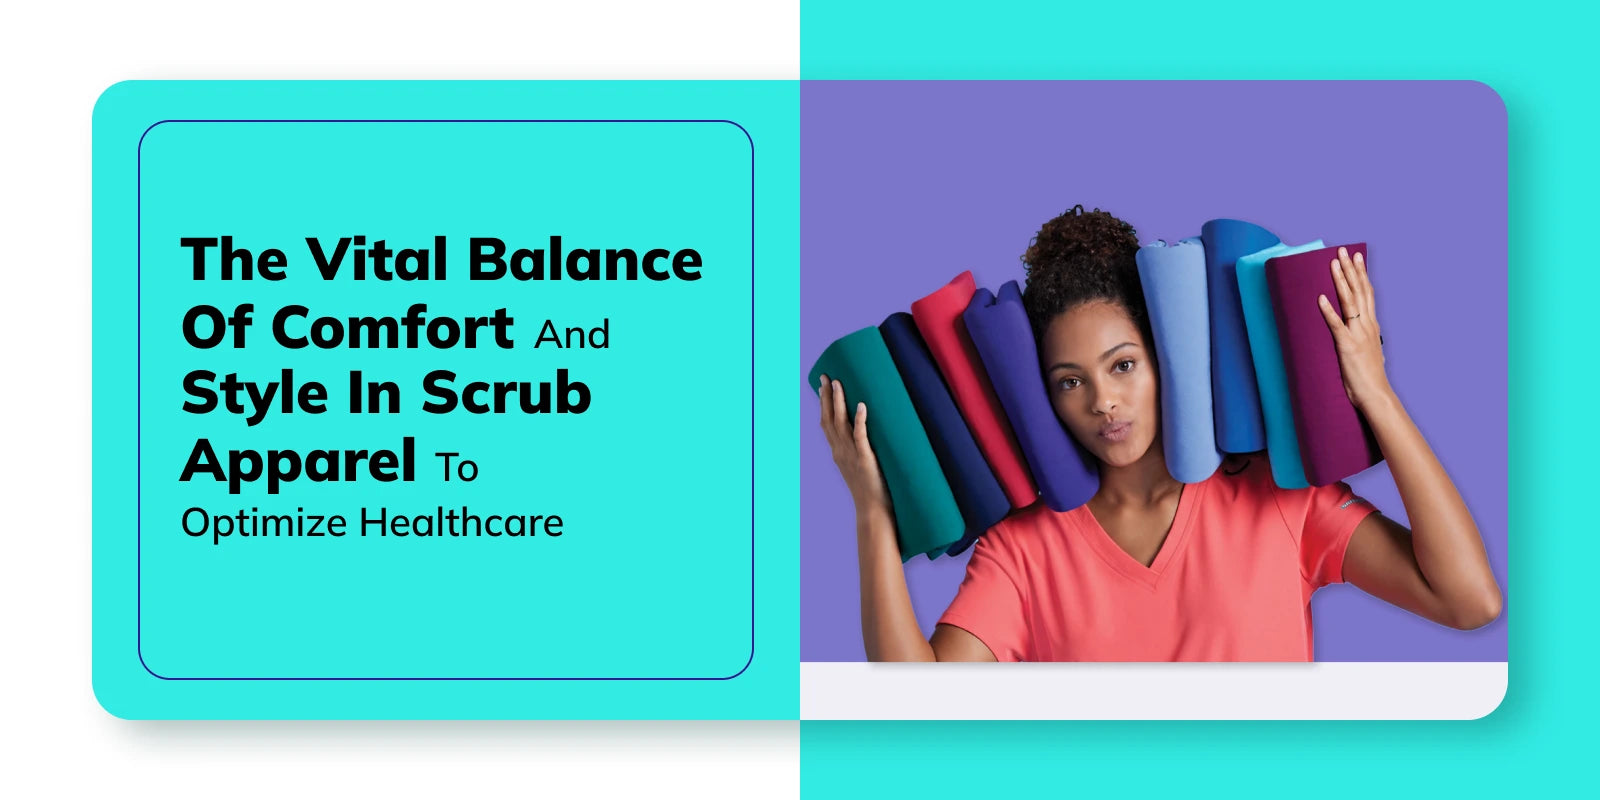 The Vital Balance of Comfort and Style in Scrub Apparel to optimize Healthcare